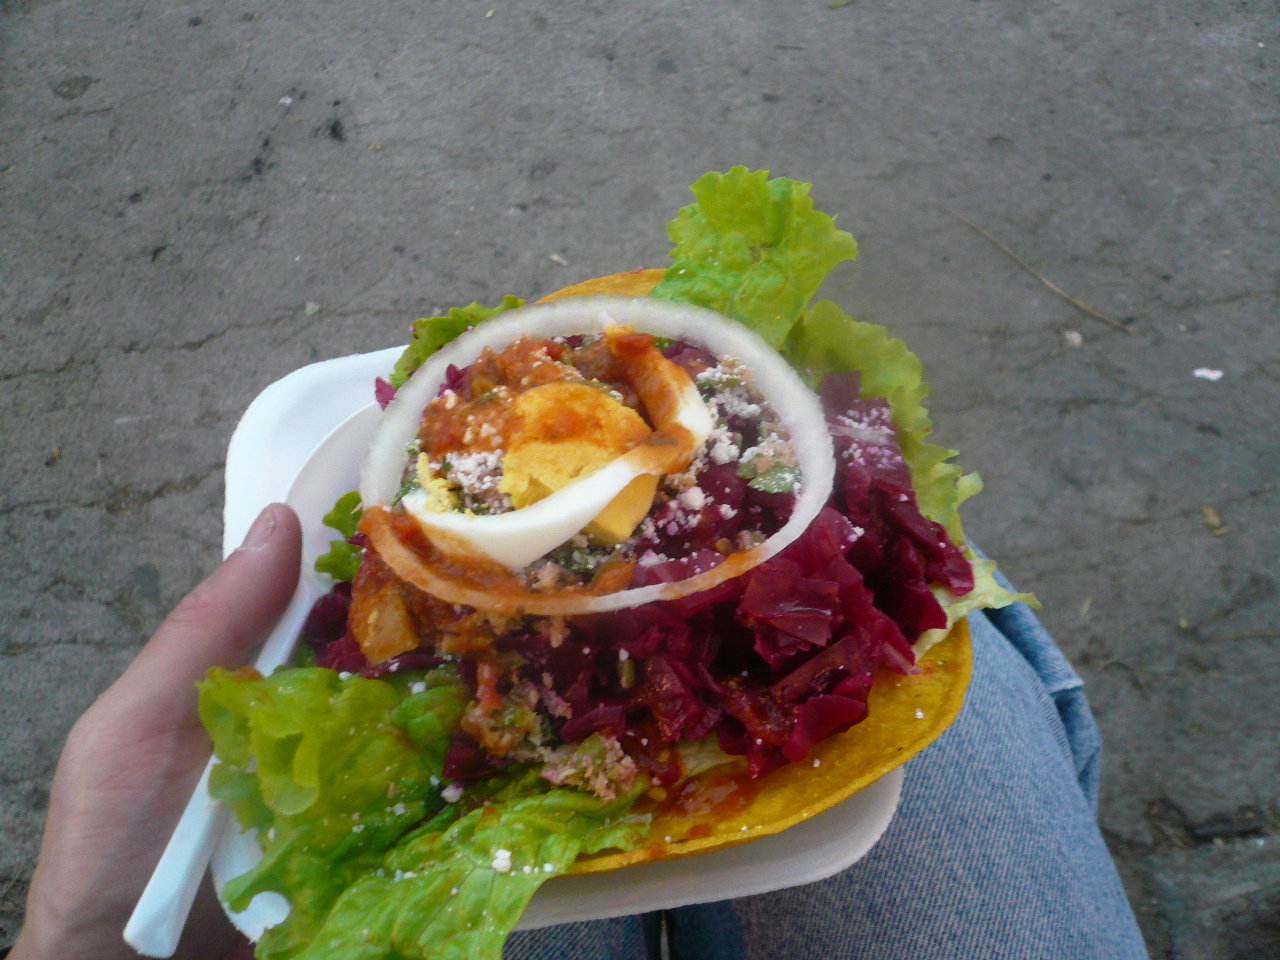 This crispy tortilla with lettuce, radishes, onion and cheese was delicious.  It was Q7 (USD$0.89) in Antigua, Guatemala.  I'm not sure what the actual name of it is.